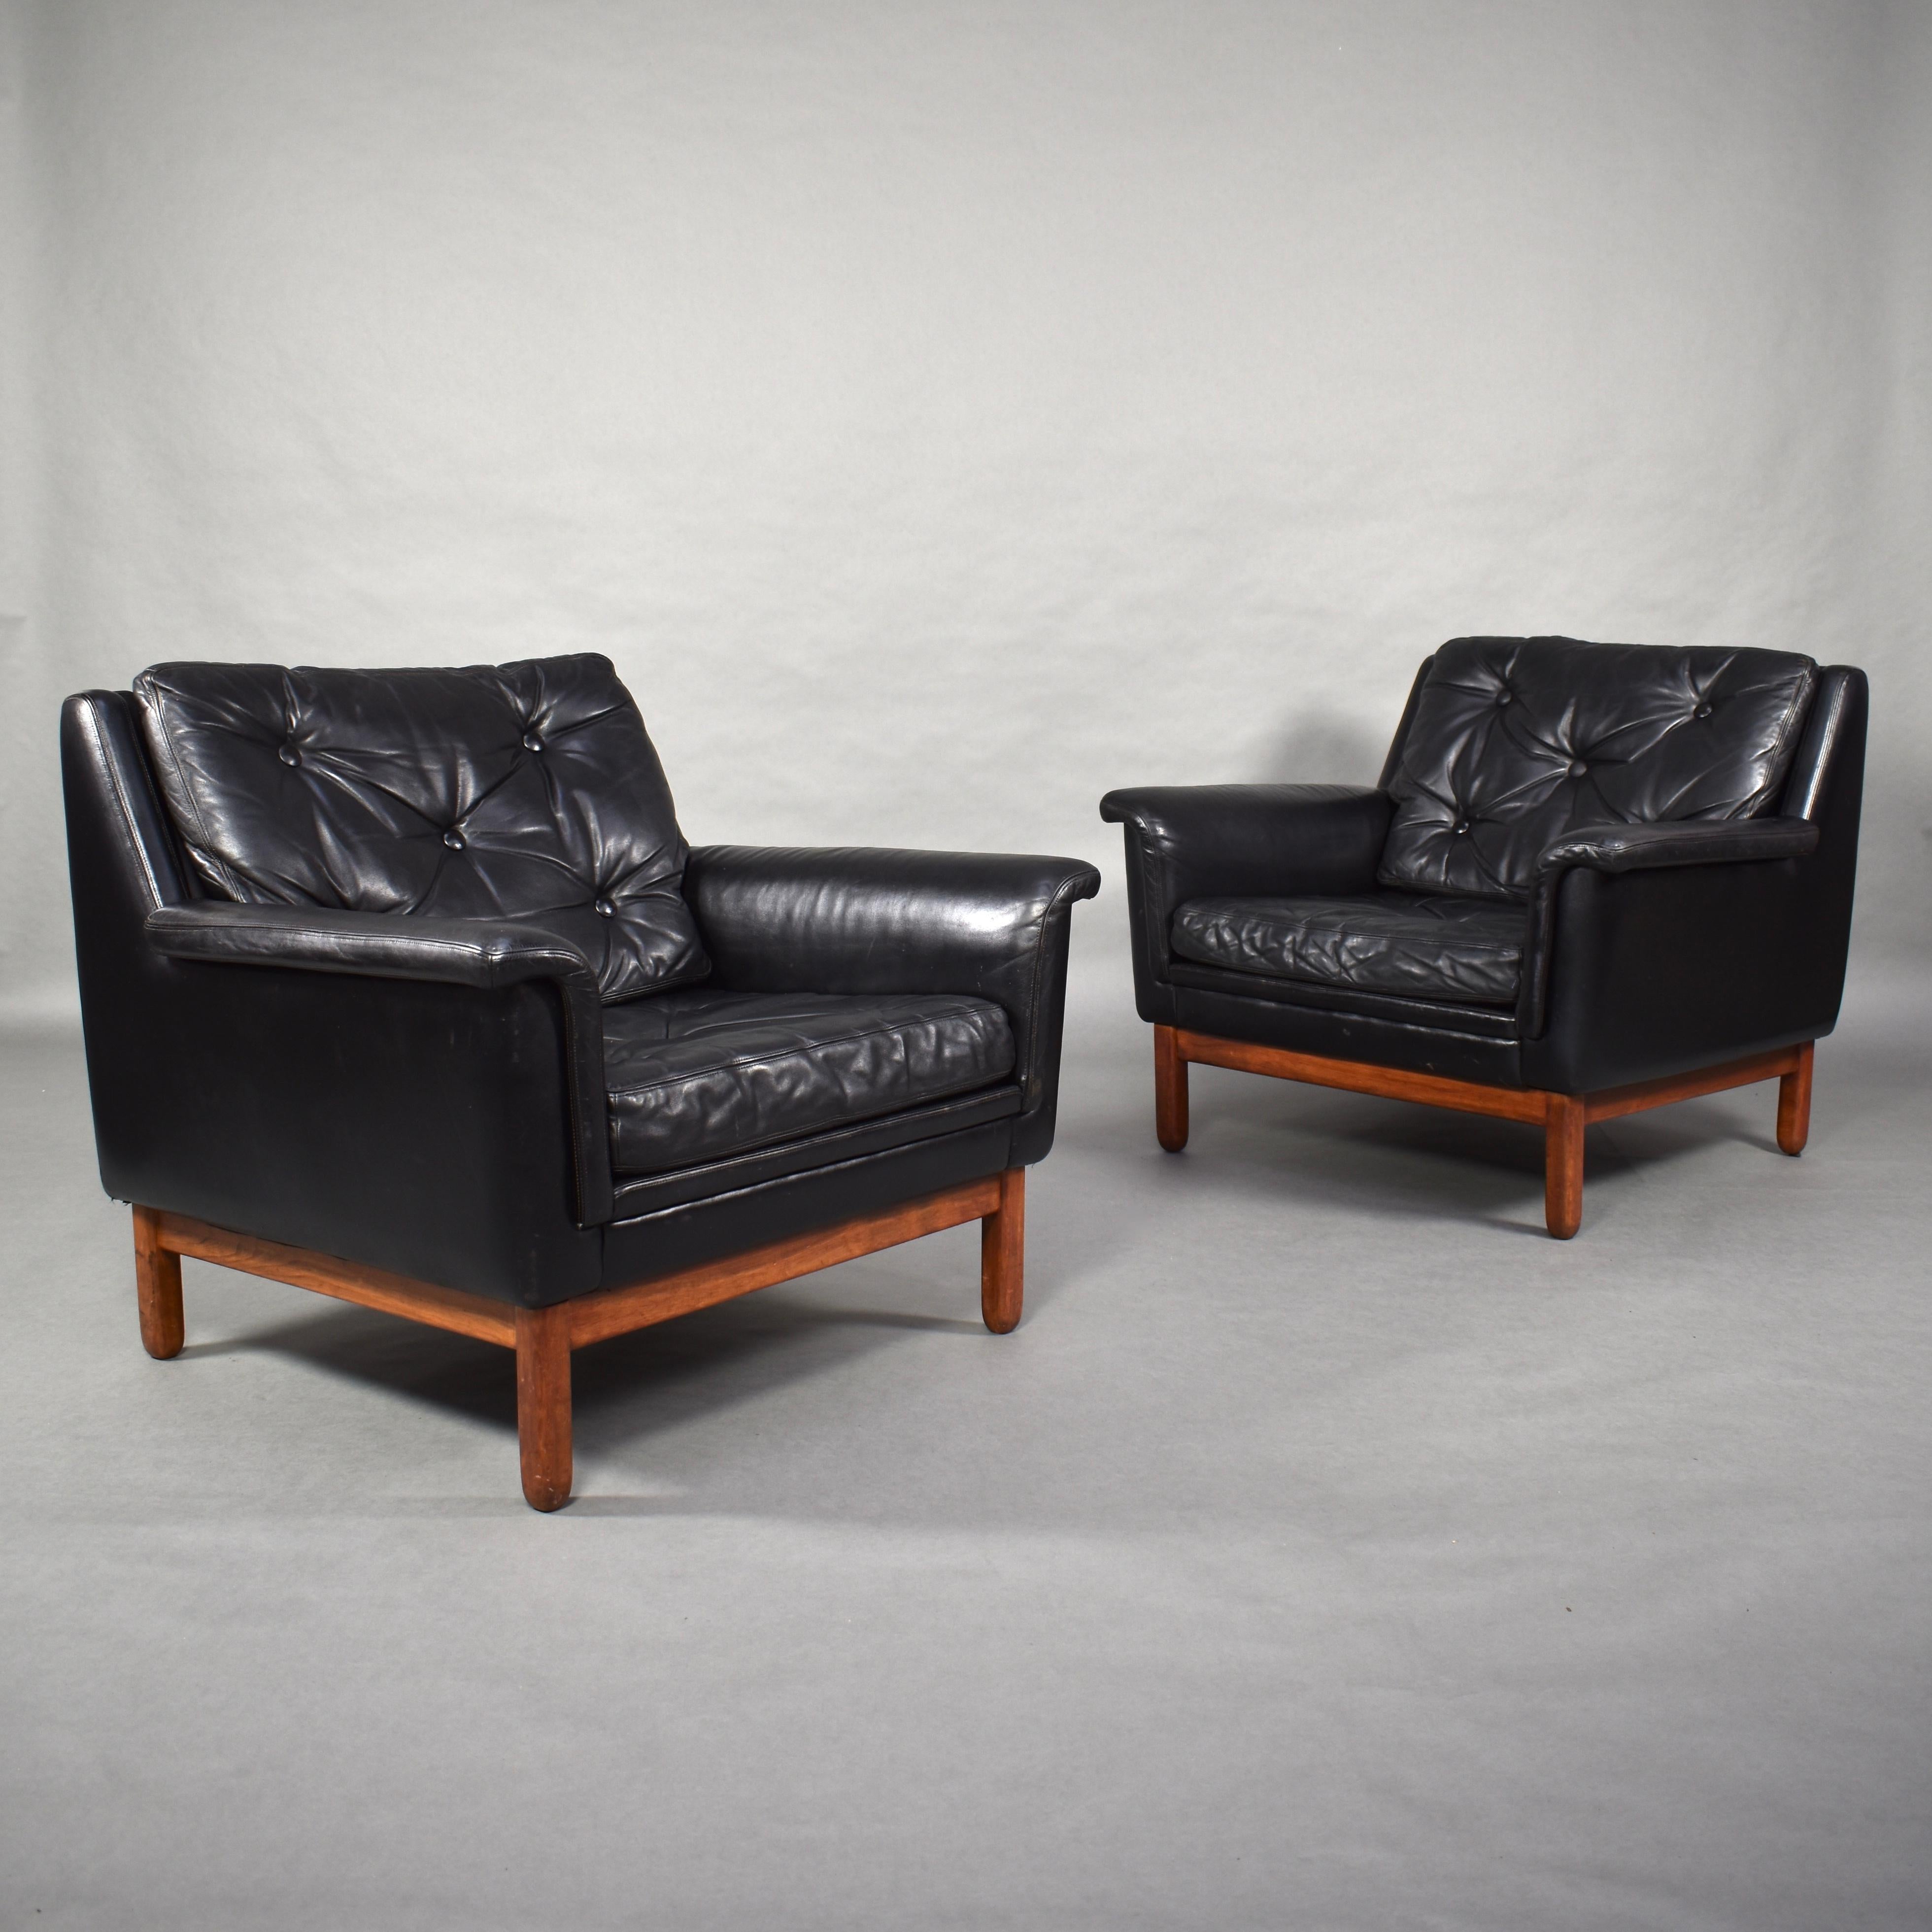 Amazing Danish lounge club chairs in black leather. Also available with 3-seat sofa.

These chairs will look gorgeous in every living room, restaurant or hotel lobby.

Designer: attributed to Hans Olsen

Model: Lounge club chairs / Also